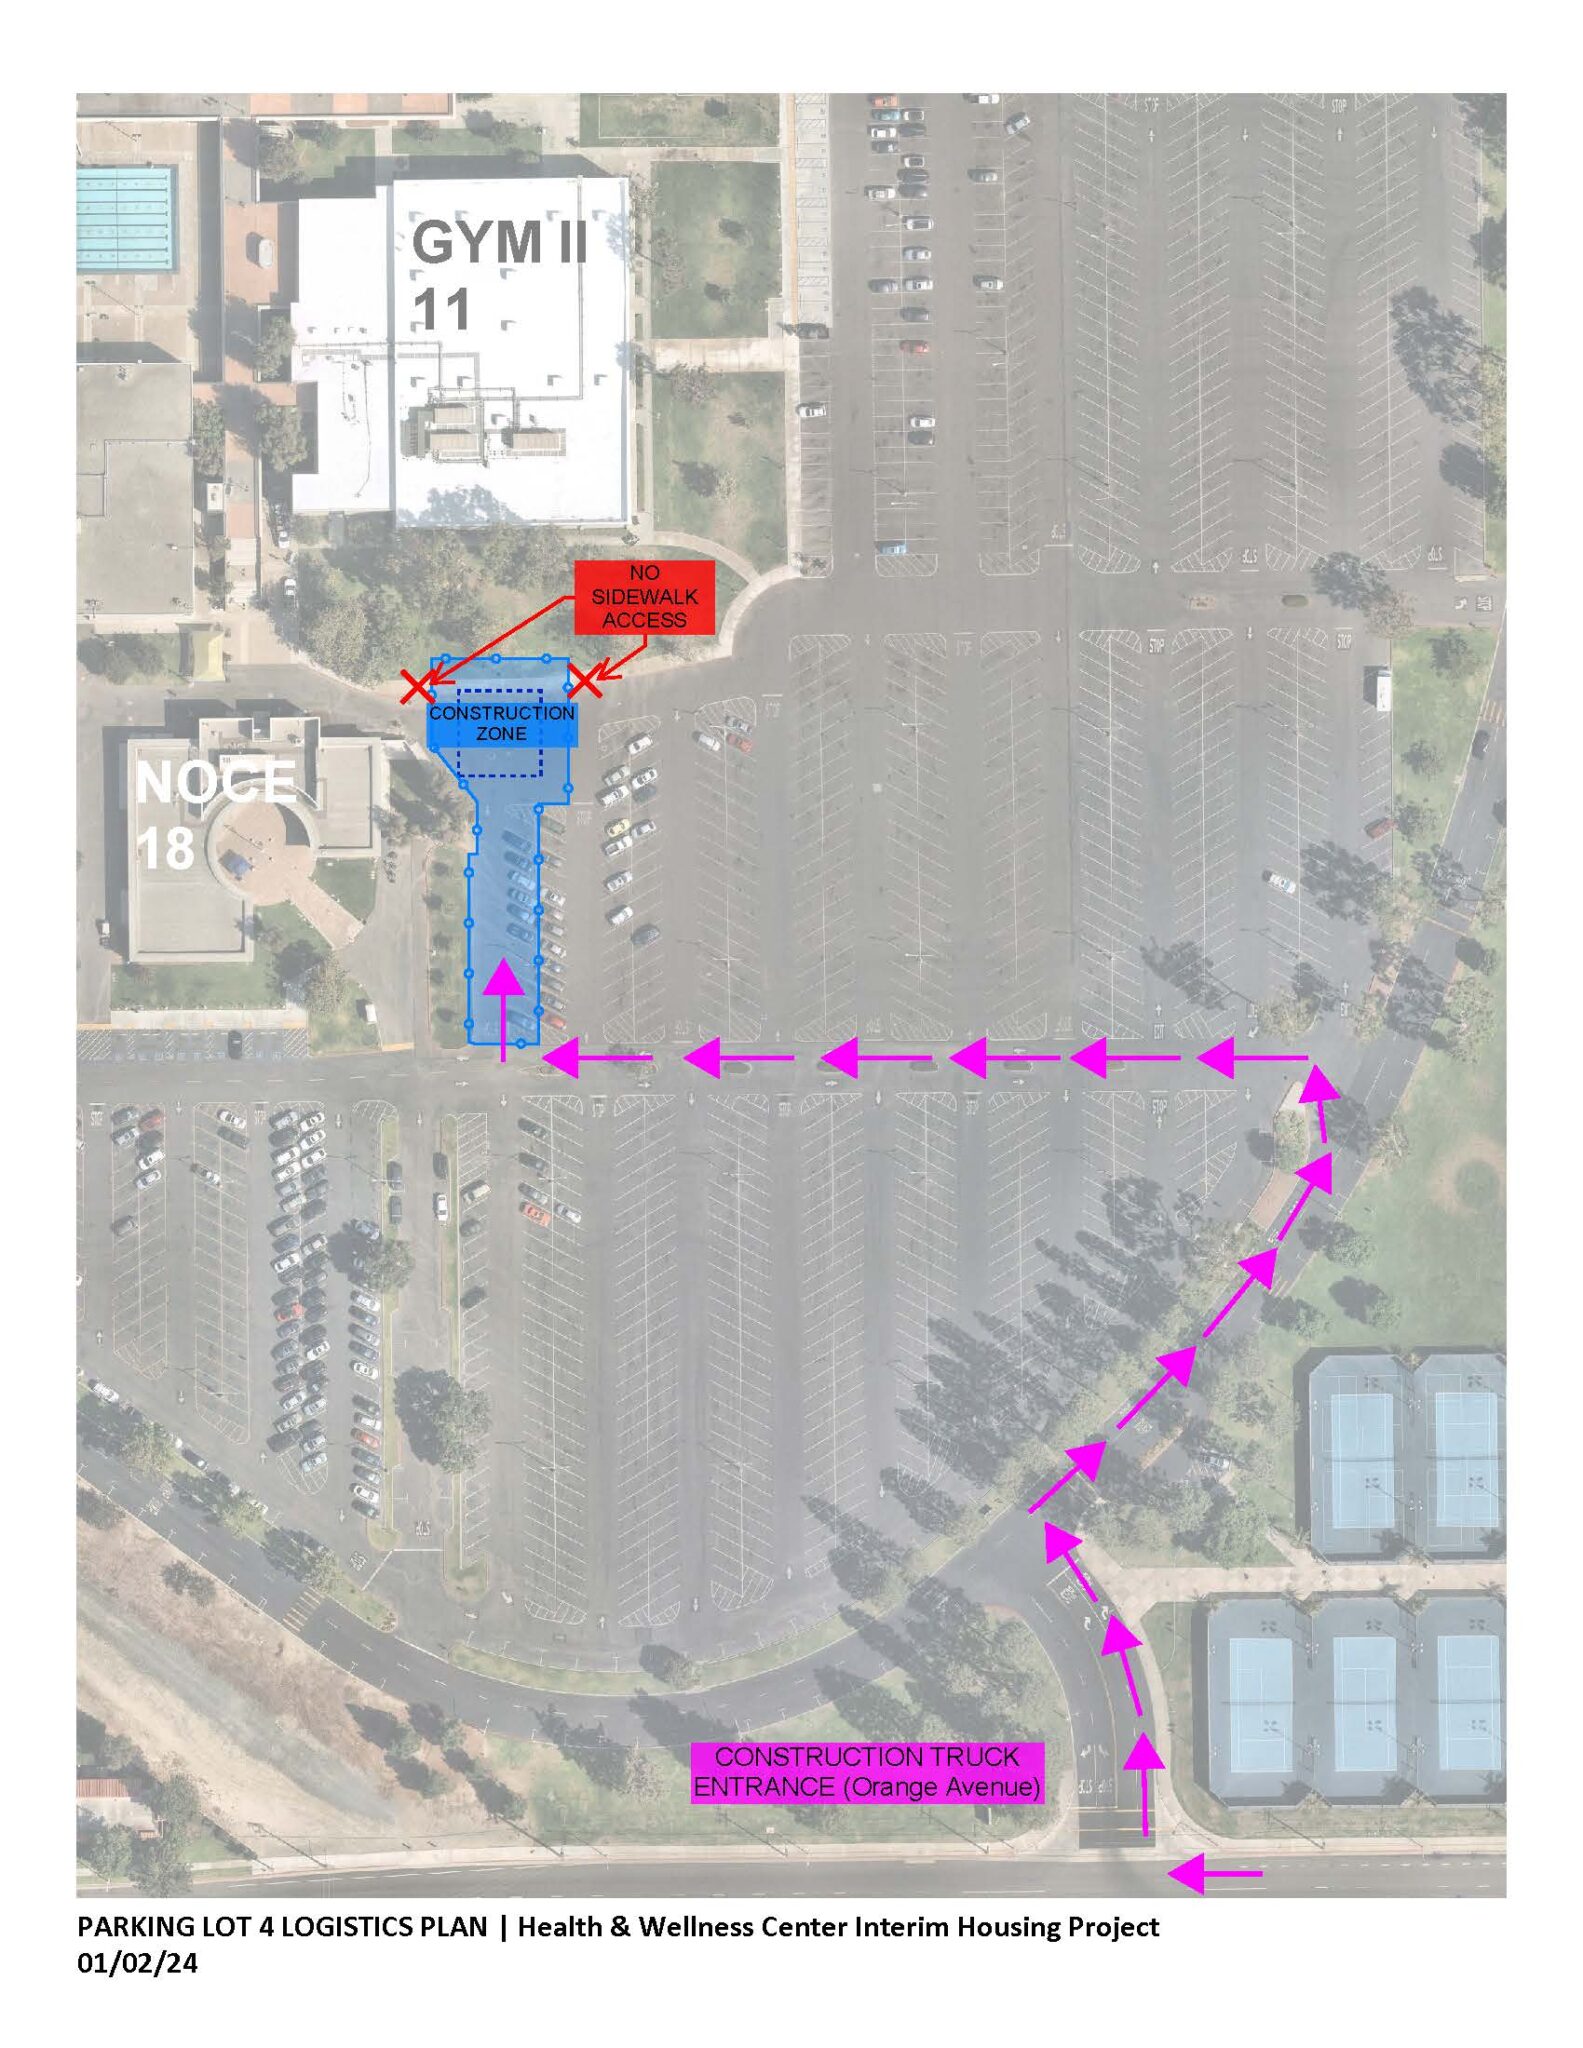 Map of campus with construction zones